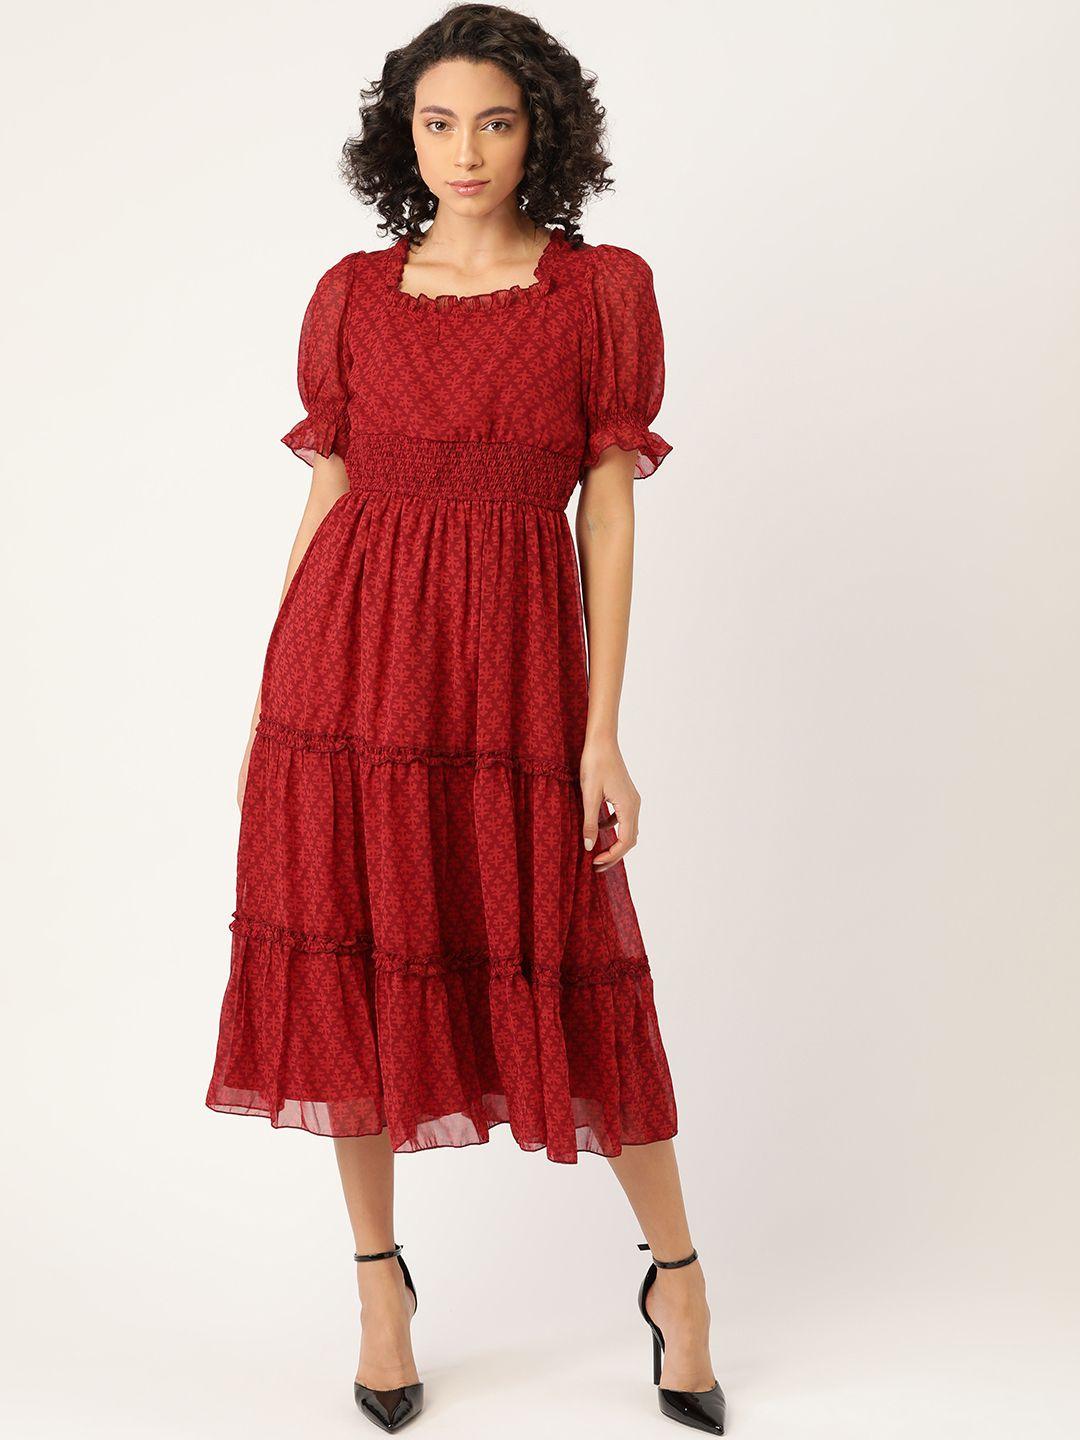 antheaa-women-red-&-maroon-printed-smocked-fit-&-flare-tiered-midi-dress